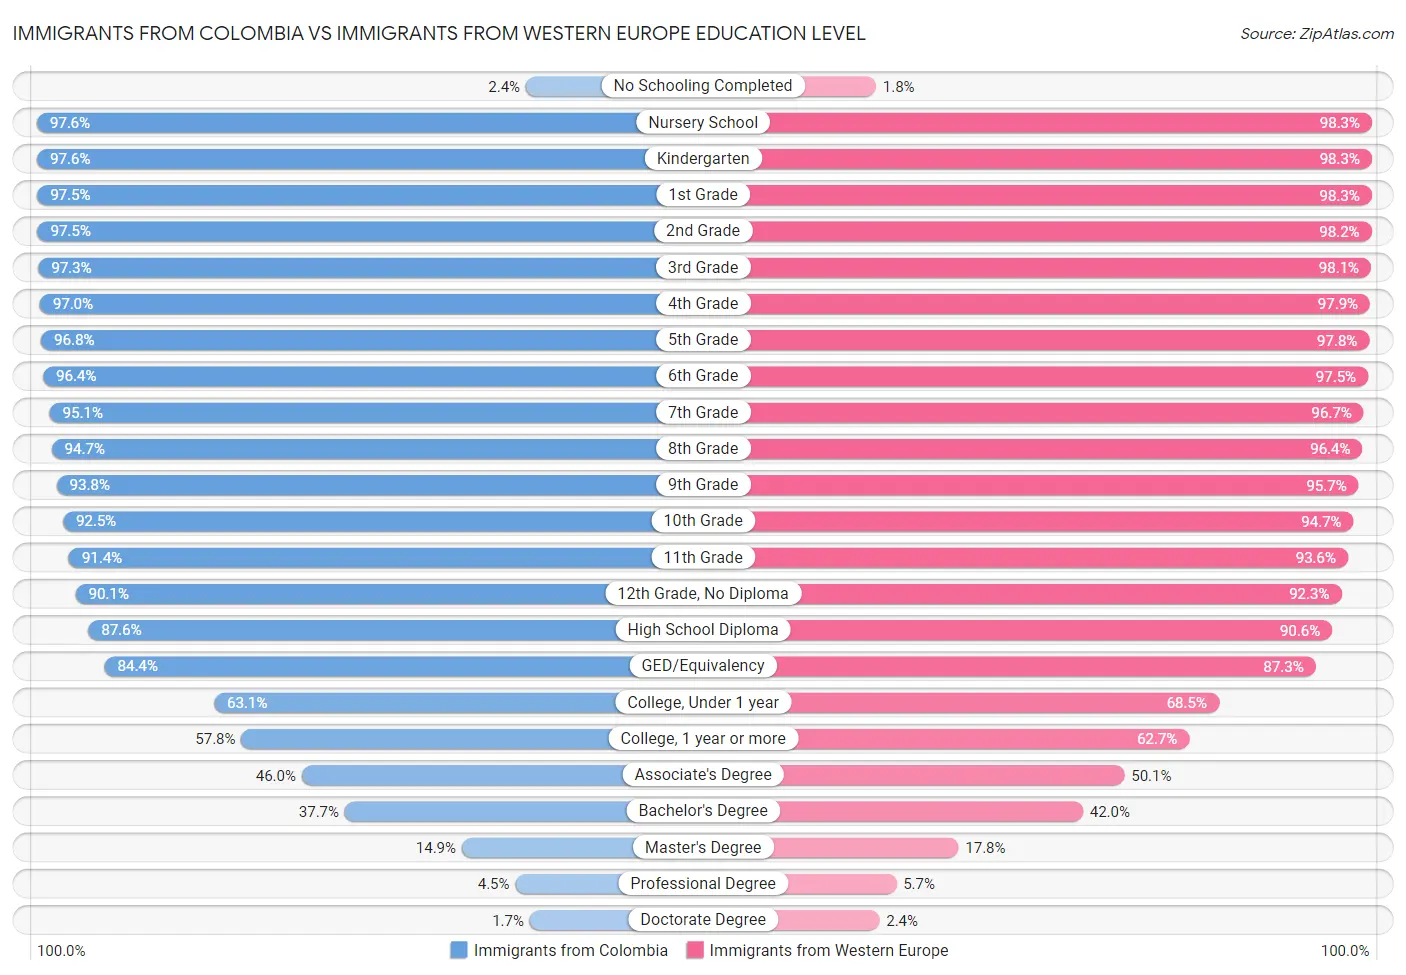 Immigrants from Colombia vs Immigrants from Western Europe Education Level